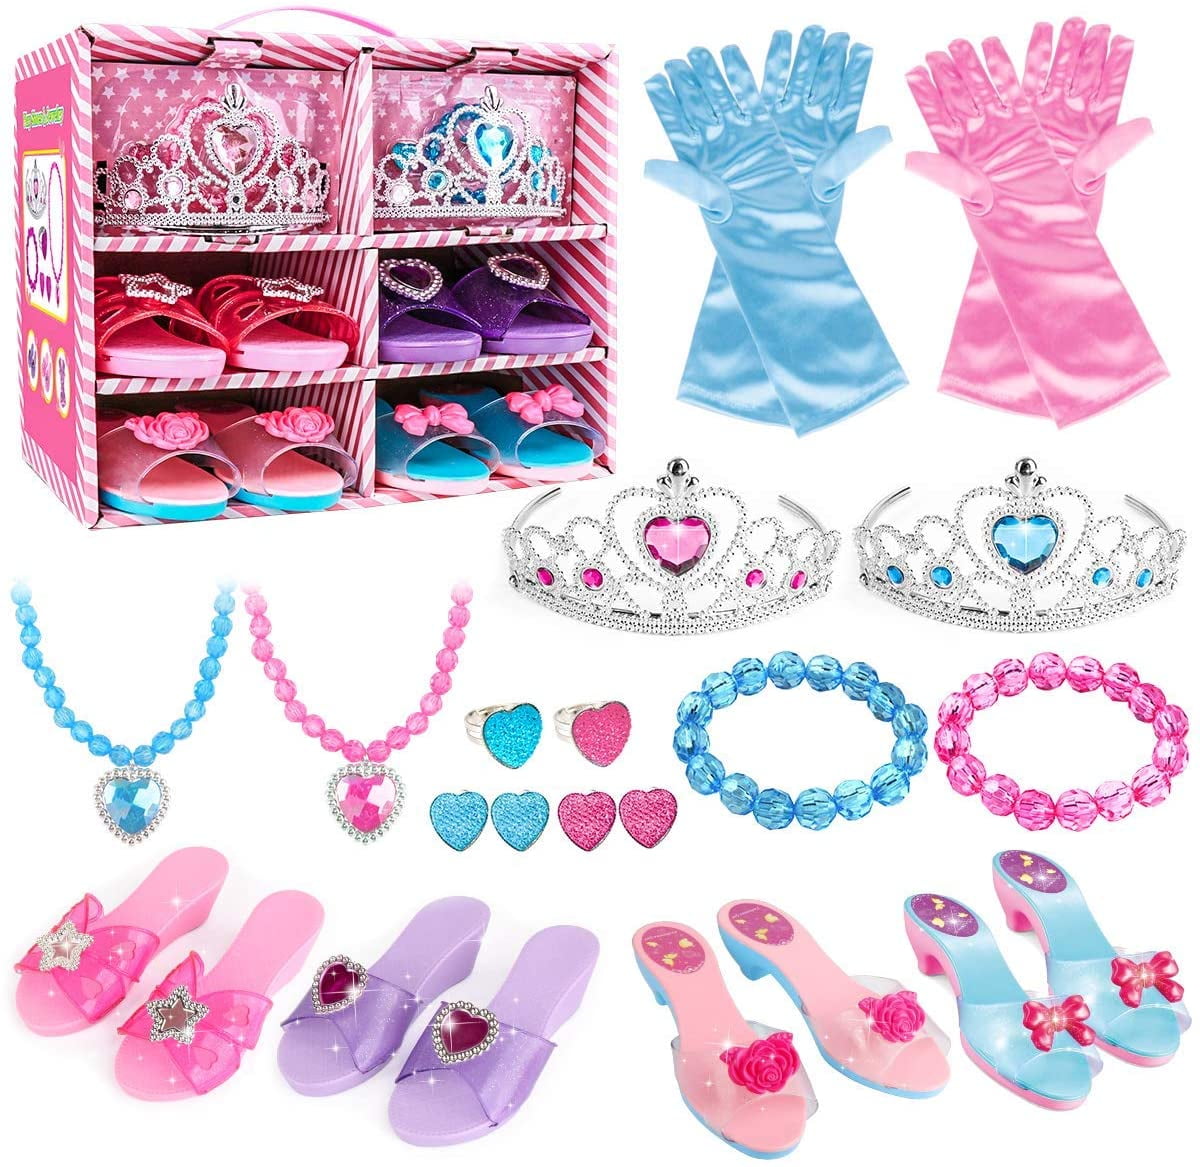 Fedio Girls Princess Dress up Shoes Role Play Collection Shoes Set with Princess 